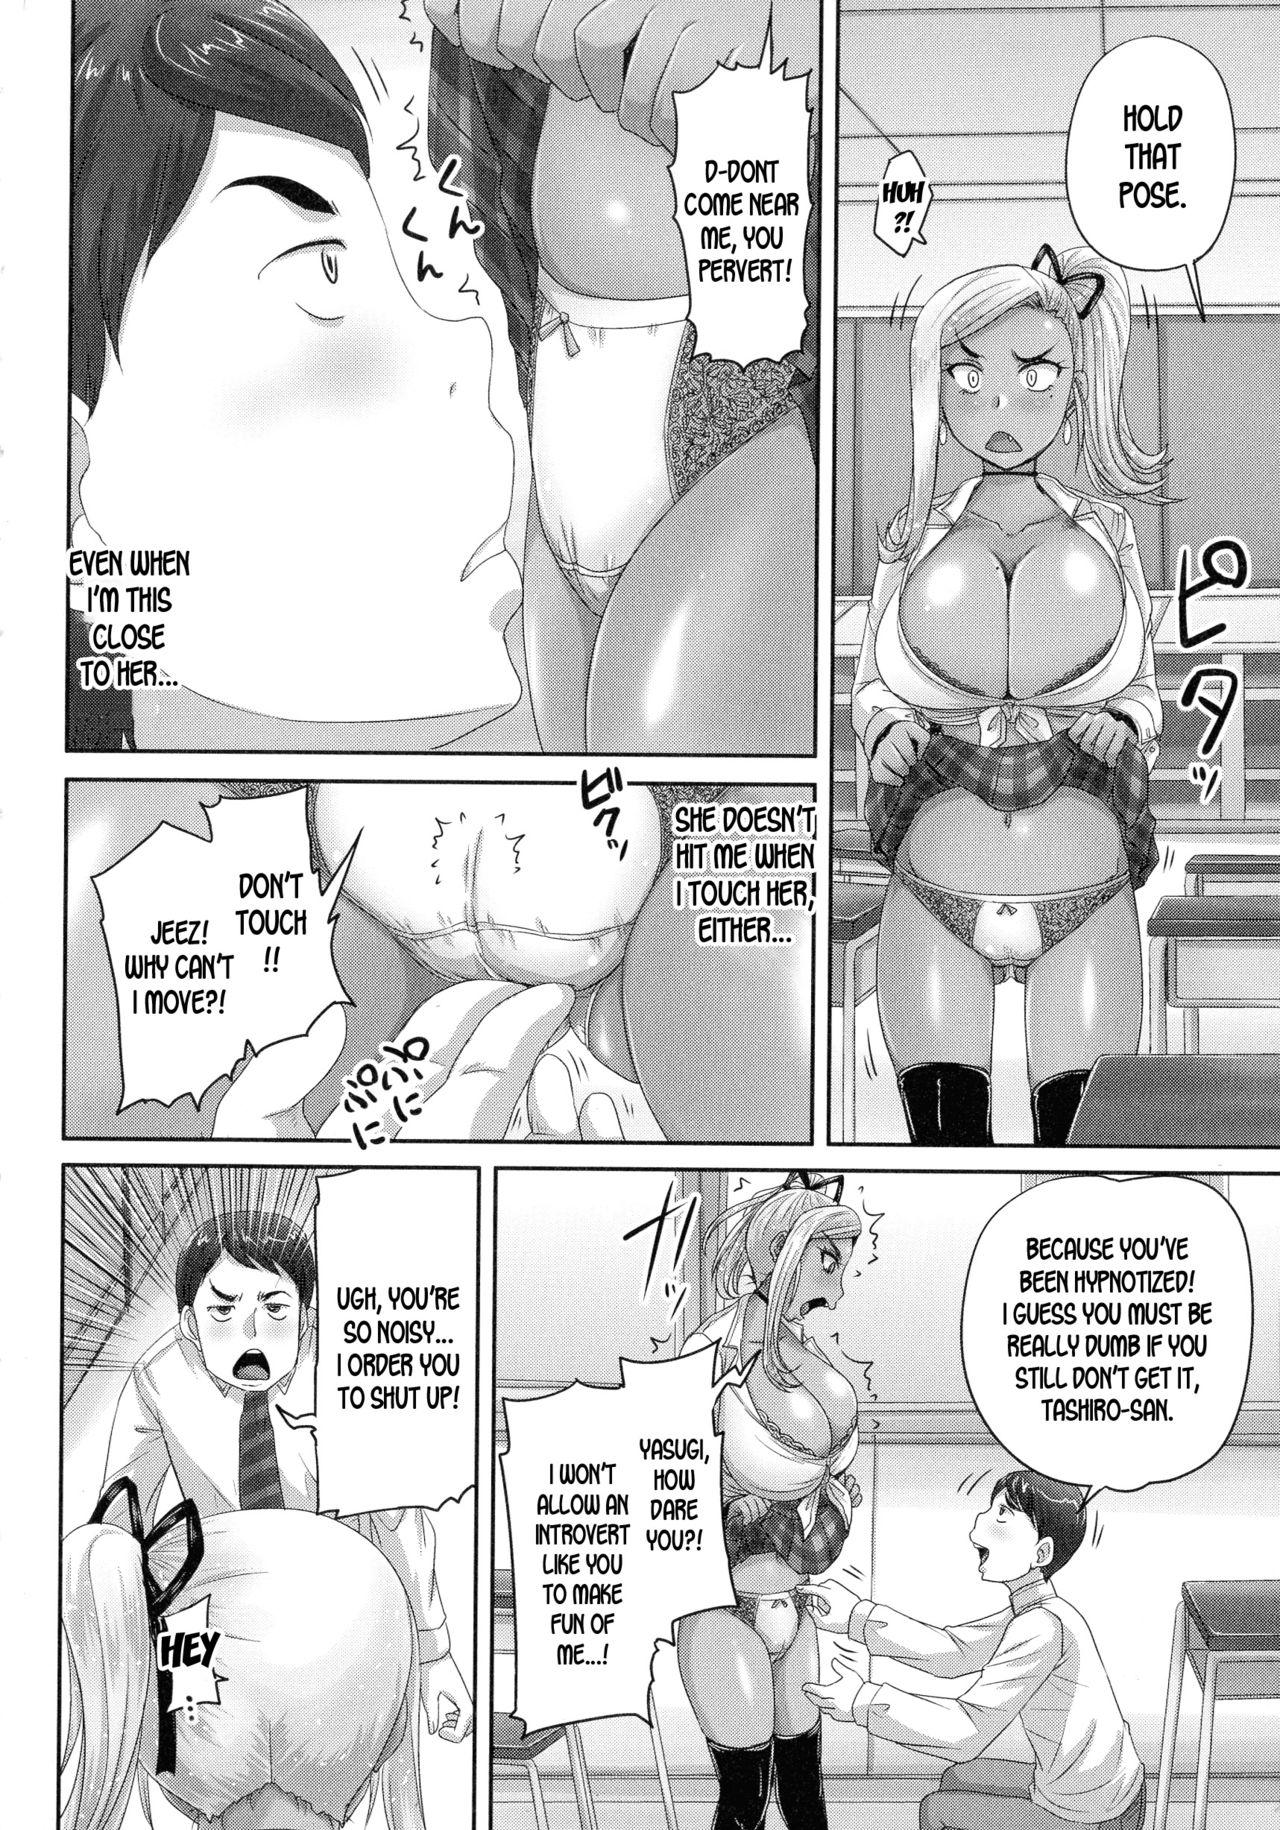 Sex Be Careful of Trial Hypnosis! Tinder - Page 6